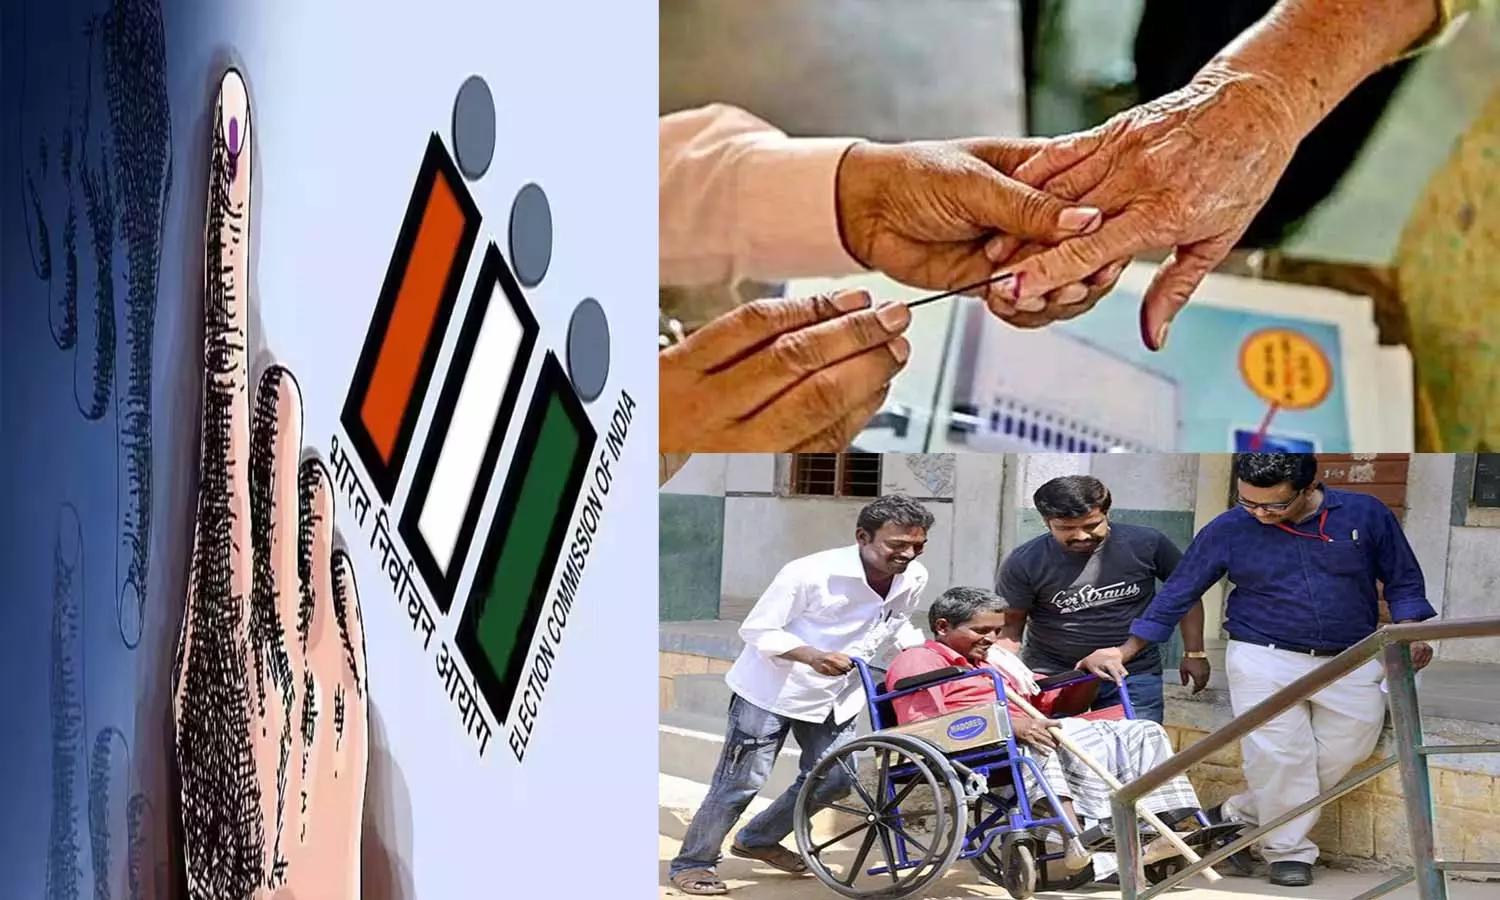 For the Lok Sabha elections, senior citizens above 85 years of age and persons with disabilities above 40 percent will be able to vote from home